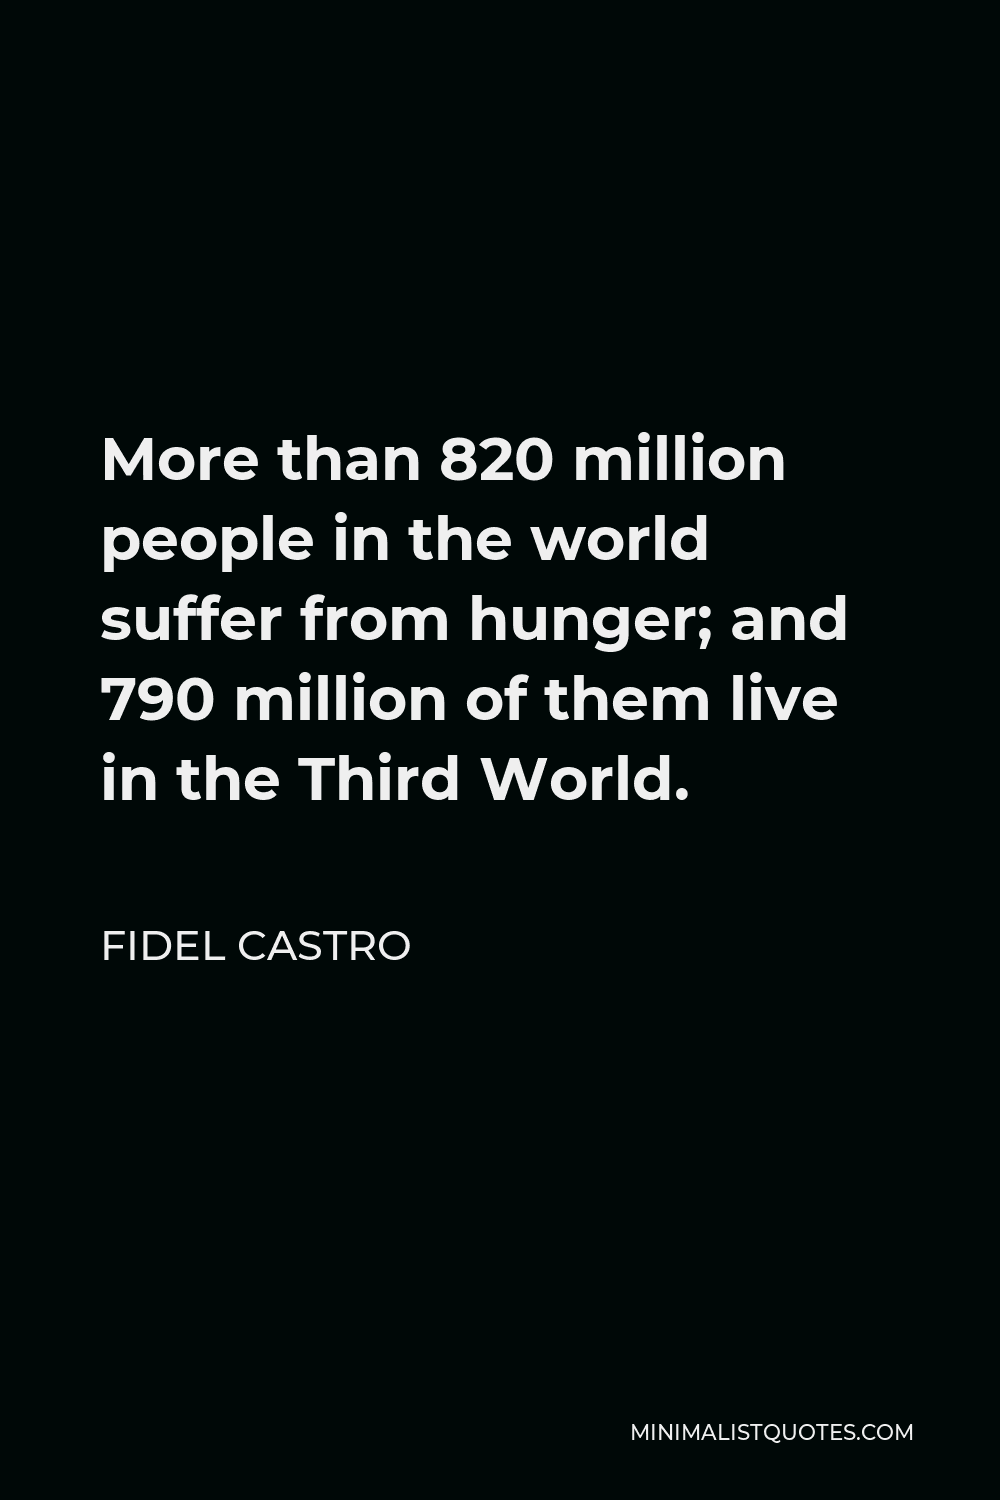 Fidel Castro Quote - More than 820 million people in the world suffer from hunger; and 790 million of them live in the Third World.